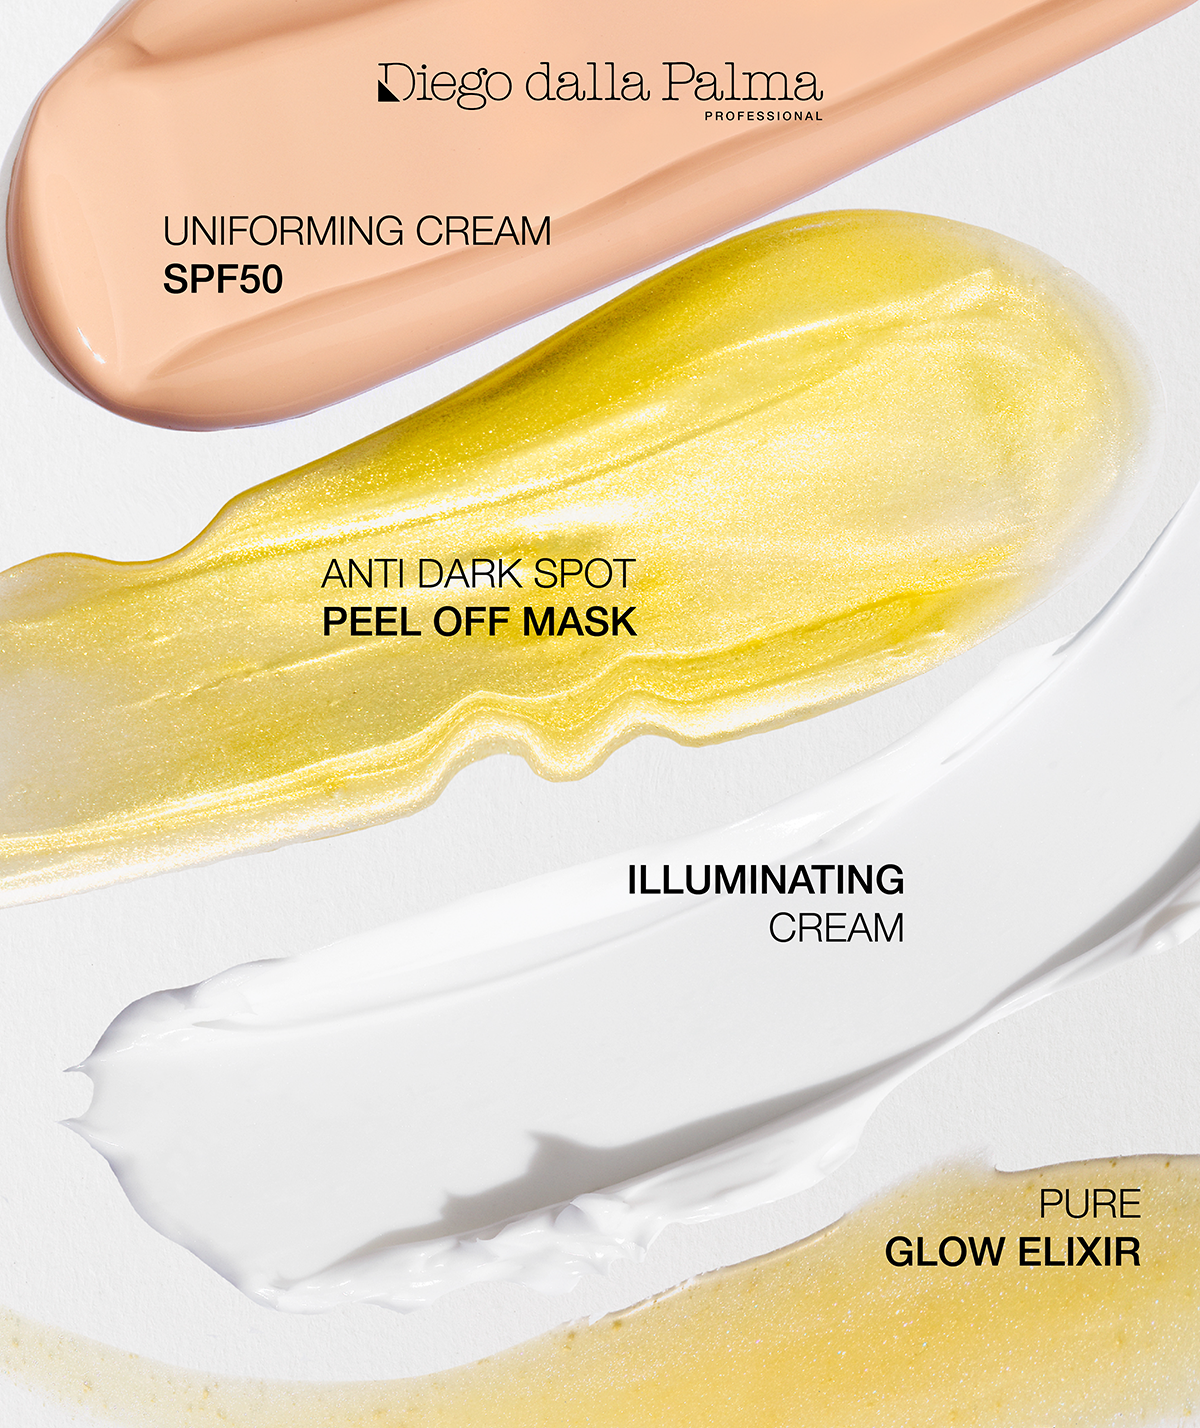 Diego dalla Palma Resurface2 Bright C is here to illuminate your complexion 2